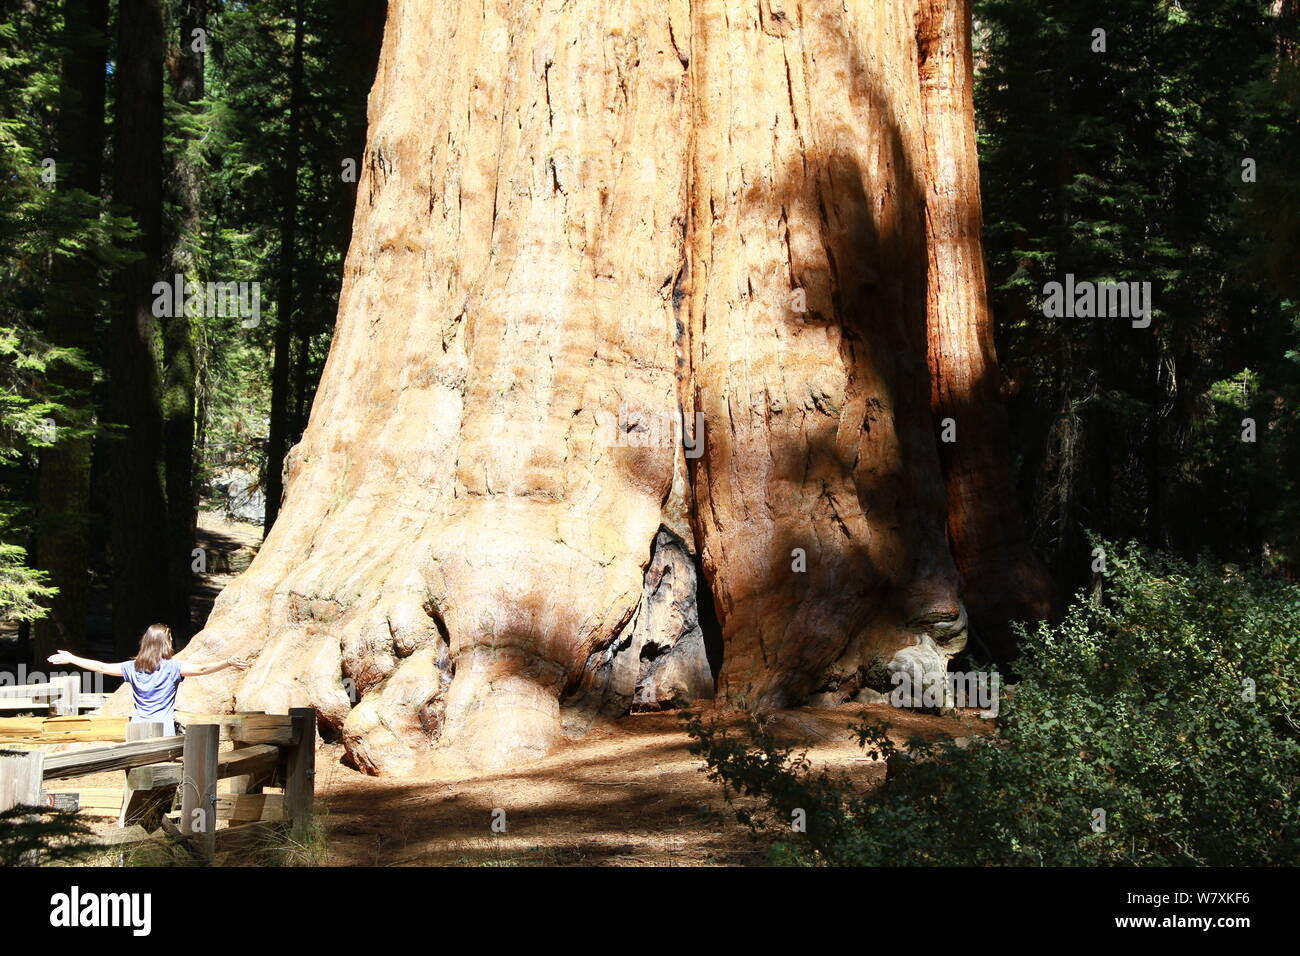 THE GENERAL SHERMAN . GIANT SEQUOIA TREE. THIS IS THE LARGEST TREE ON EARTH , PHOTOGRAPH TAKEN ON 27TH SEPTEMBER 2019 IN THE SEQUOIA NATIONAL PARK 9OOO FEET ABOVE SEA LEVEL. BY VOLUME IT IS THE LARGEST KNOWN LIVING SINGLE STEM TREE. GIANT SEQUOIA. LARGEST TREE IN THE WORLD. 102 FEET [ 31.3 M ]  CIRCUMFERENCE AT GROUND. 36 FEET [ 11.1 M ]  DIAMETRE AT BASE. SCIENTIFIC. SPECIES NAME SEQUOIADENDRON GIGANTEUM. Stock Photo